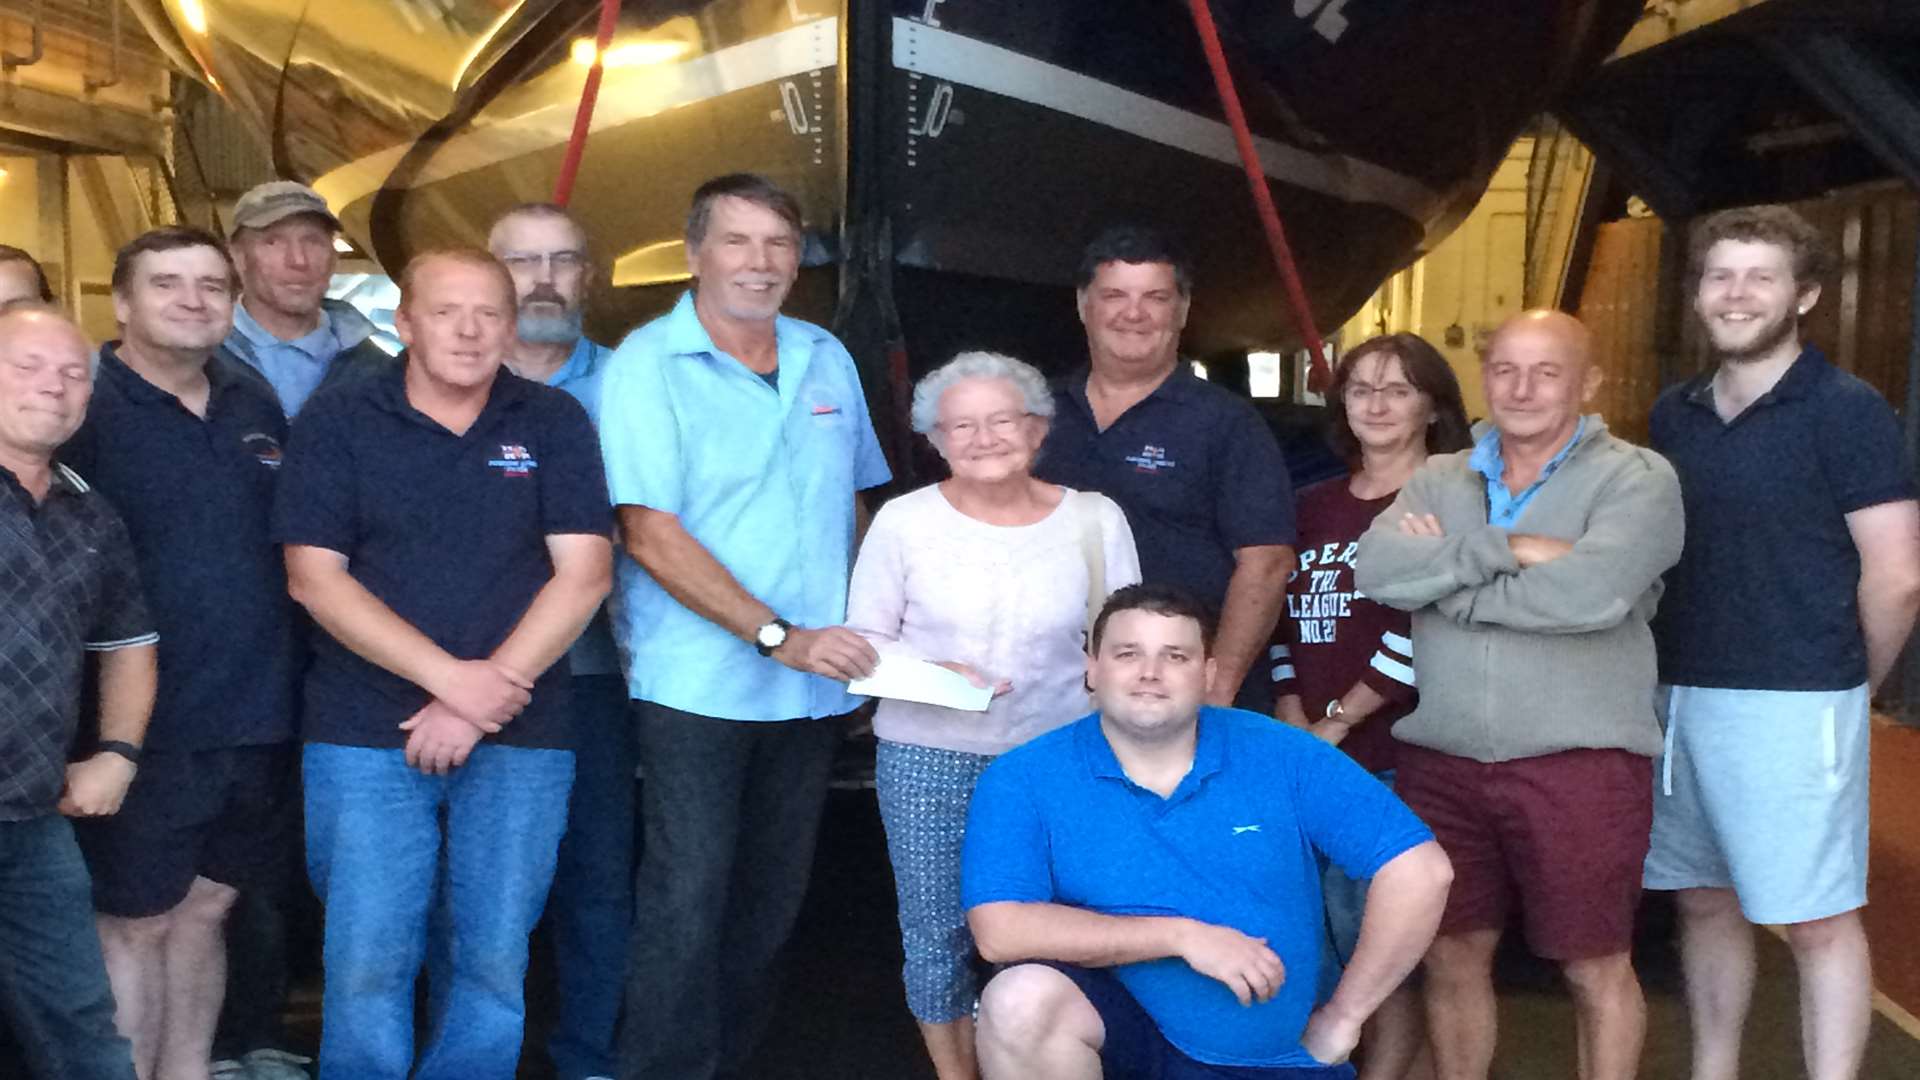 The Stanley family met volunteers at the RNLI Lifeboat station and presented a cheque for £805.13. Pic courtesy of RNLI